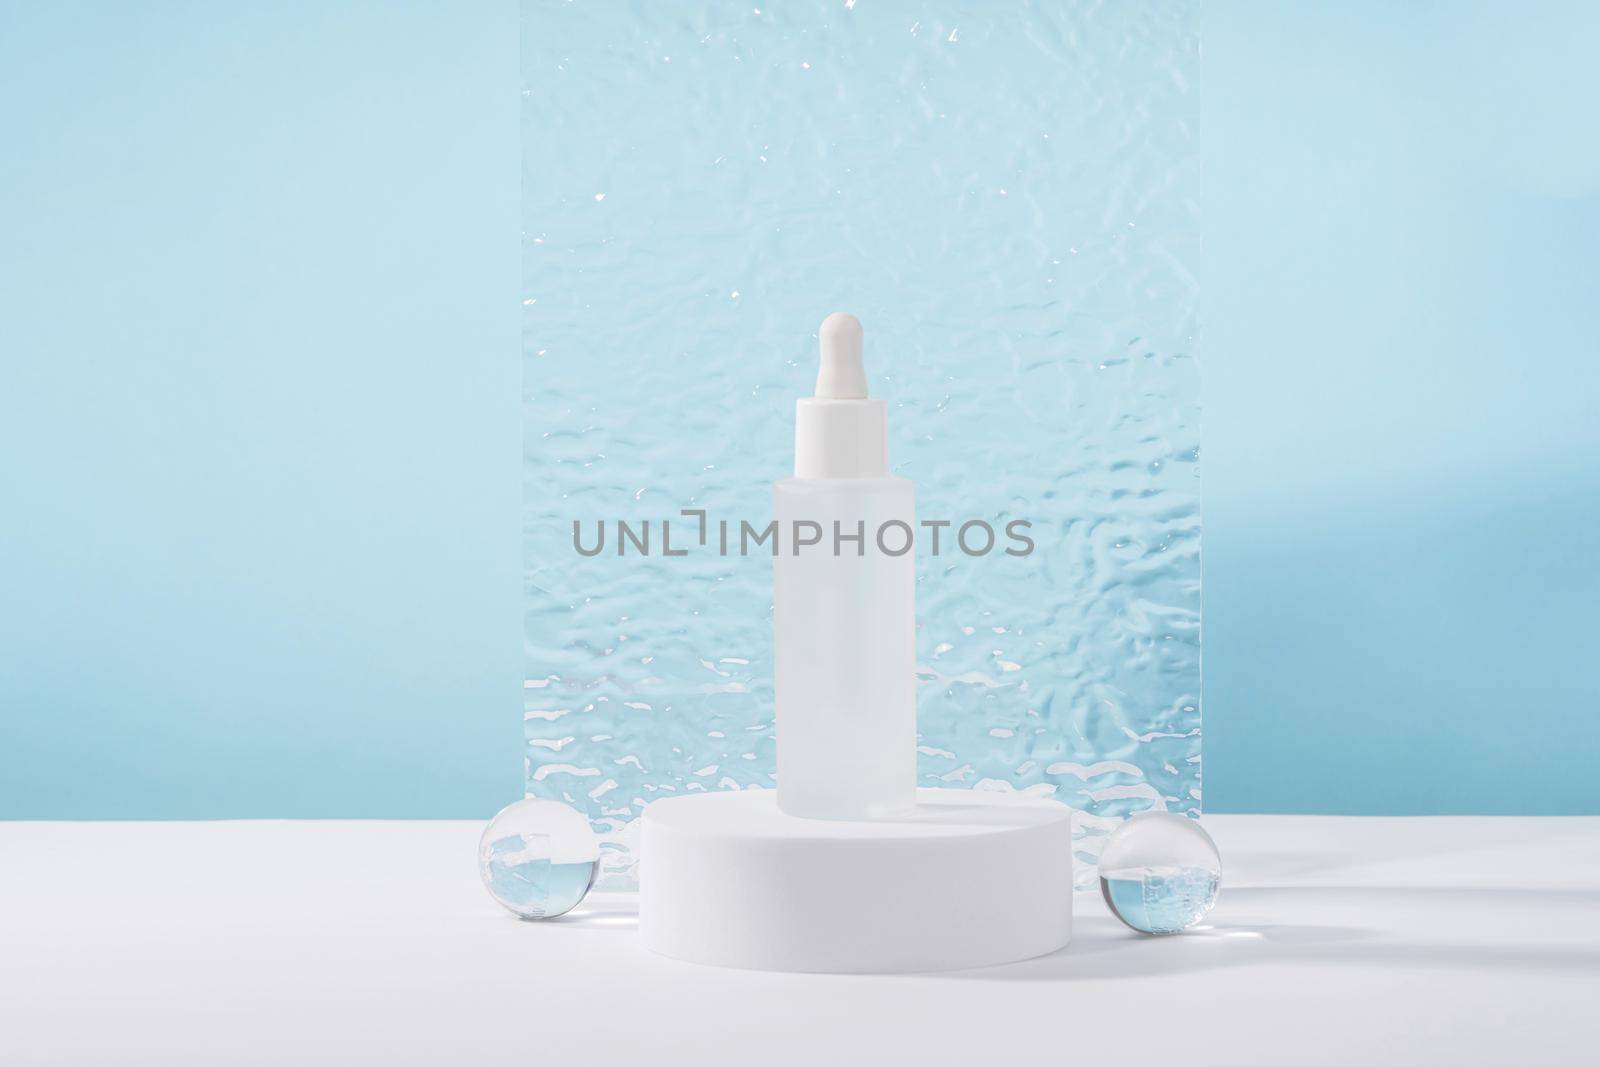 Unbranded cosmetic cream mockup on pedestal podium with stylish props, glass balls and acrylic plate. Lotion, concealer or white beauty product packaging. Product presentation mock up